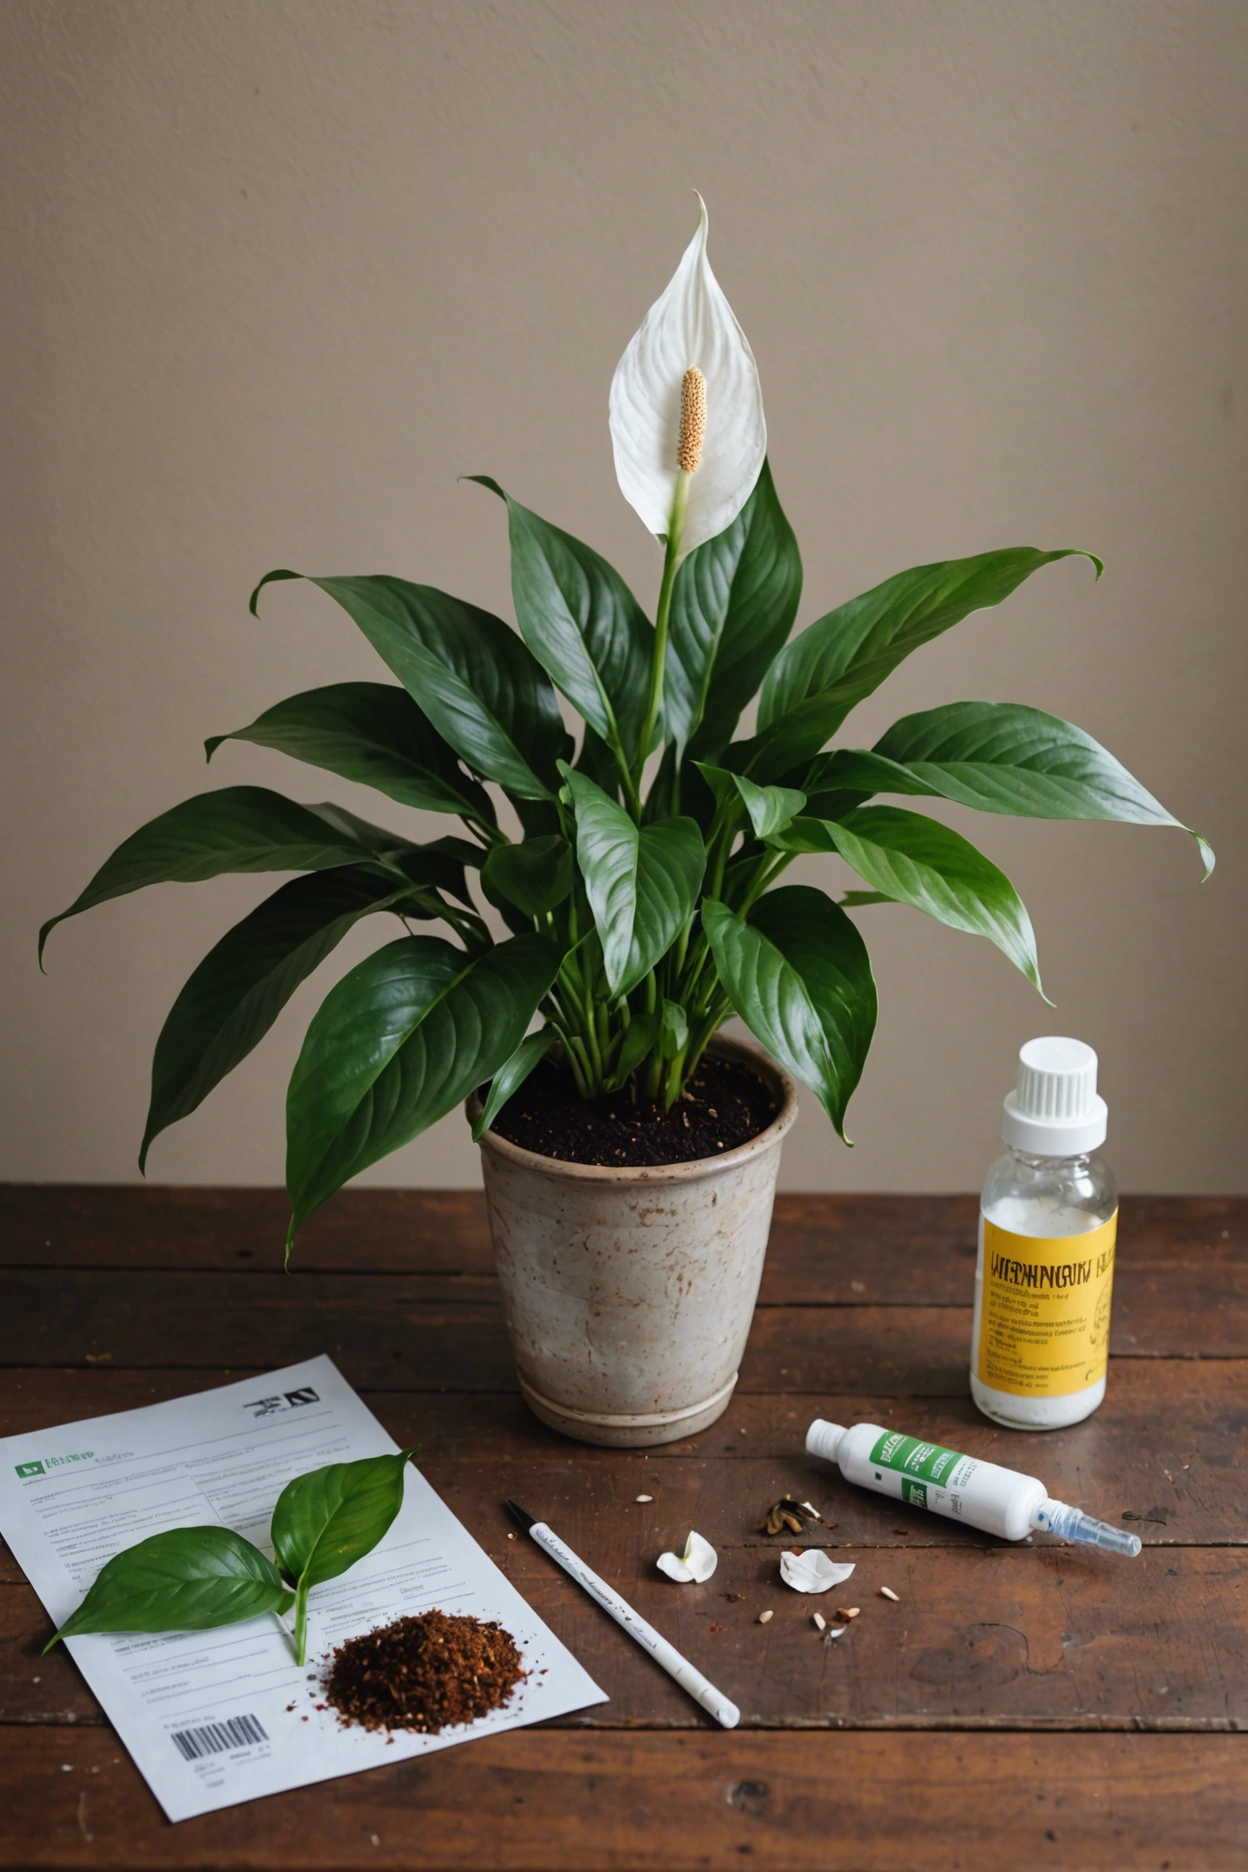 "Wilted peace lily on a wooden table surrounded by plant food, pH testing kit, and nutritional supplements."